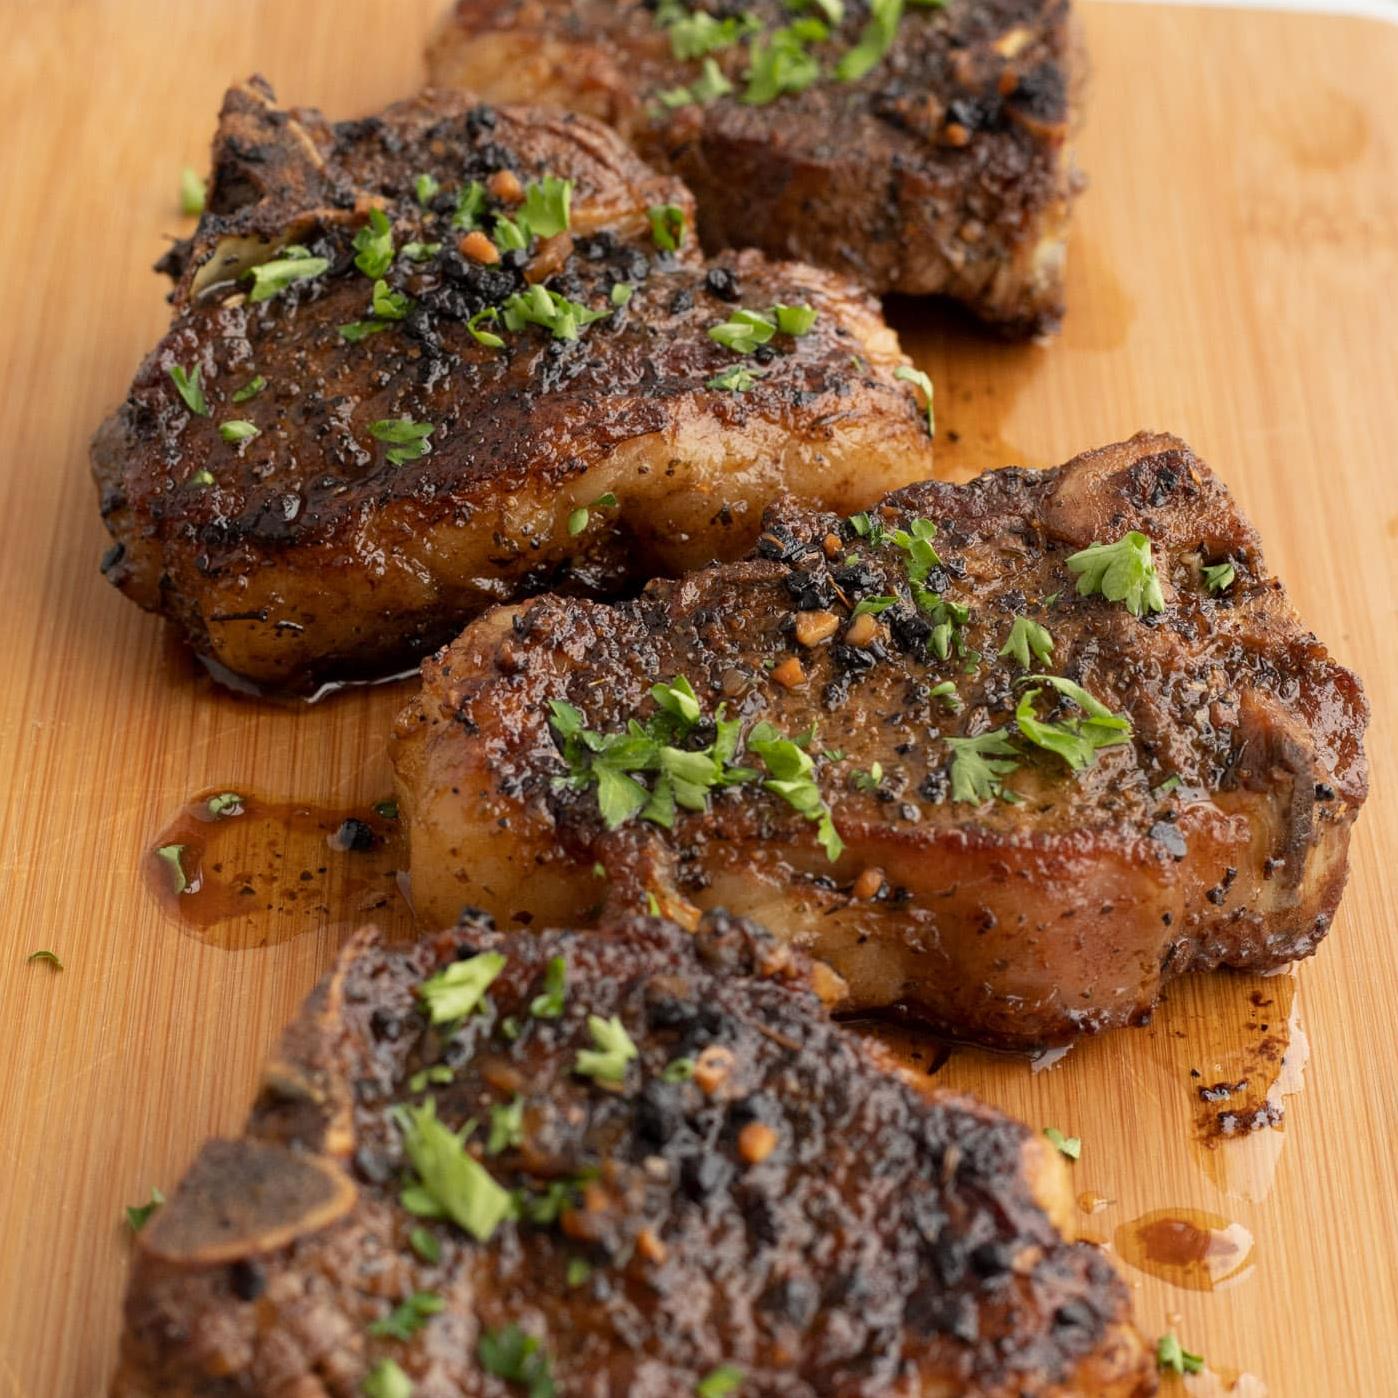  Lamb chops so tender, they almost melt in your mouth.